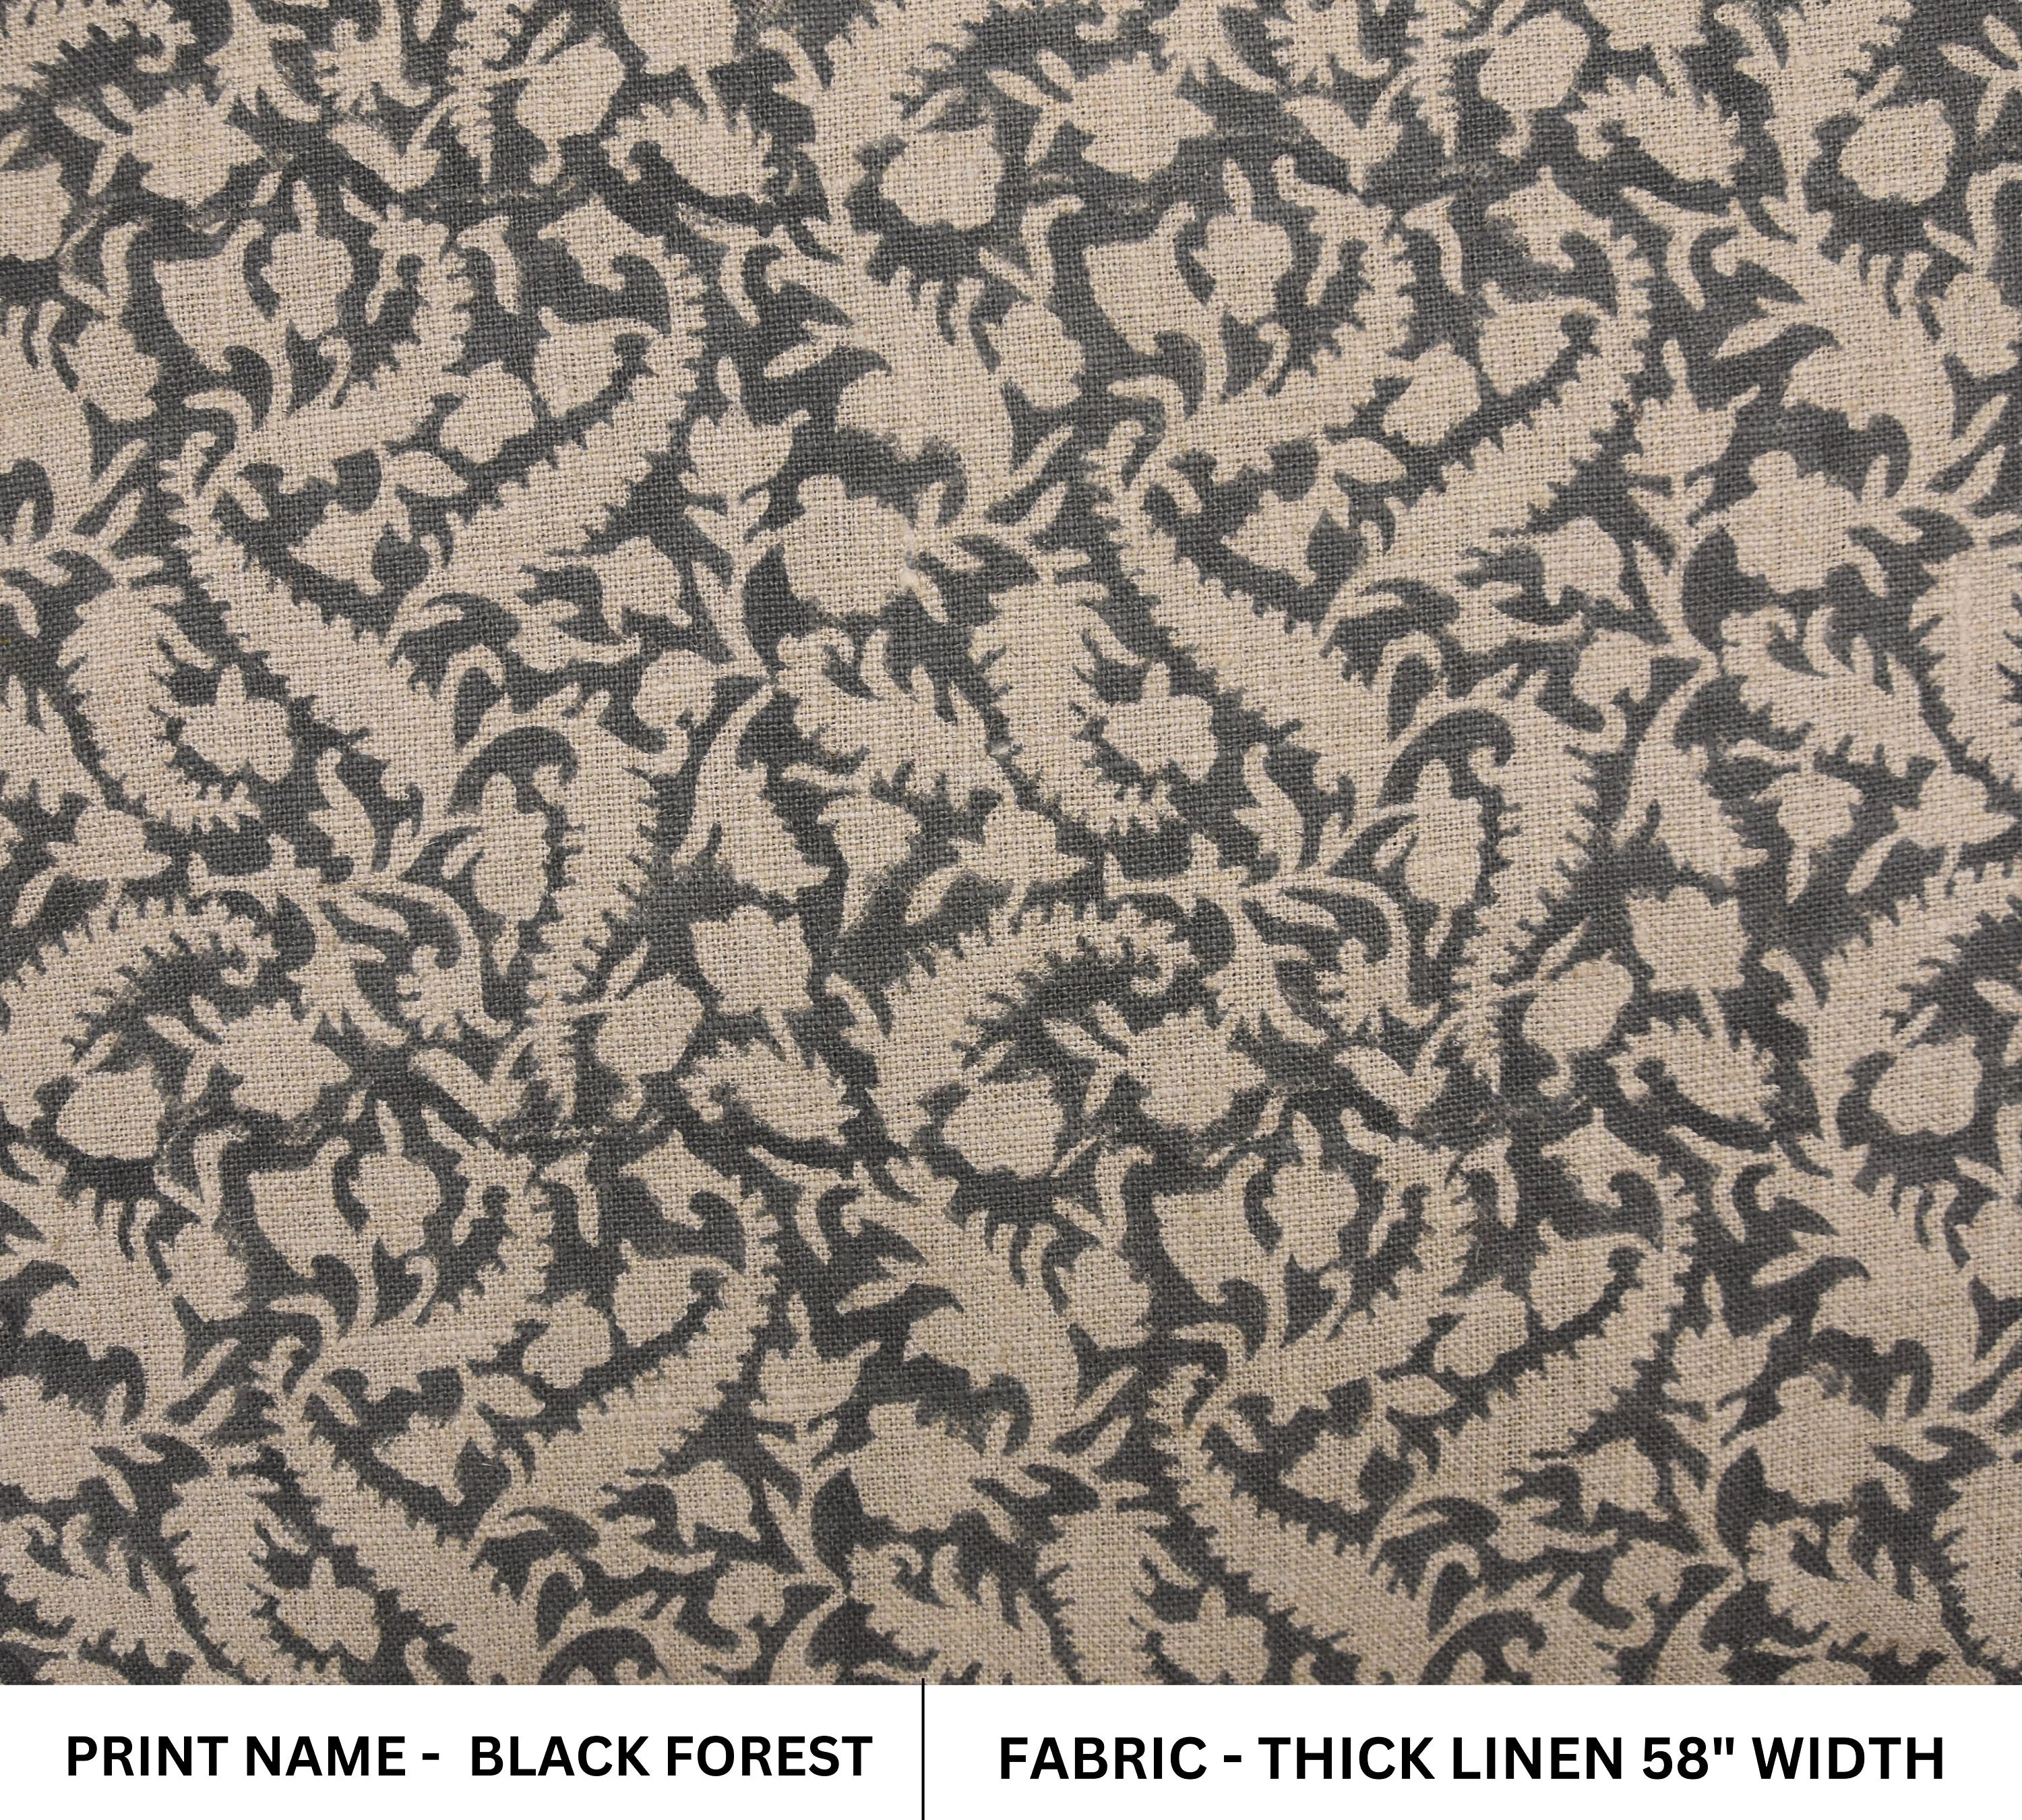 Black Forest Handloom Linenthick Linen Fabric, Indian Floral Hand Block Print On Durable Thick Linen Fabric By The Yard For Home Decor